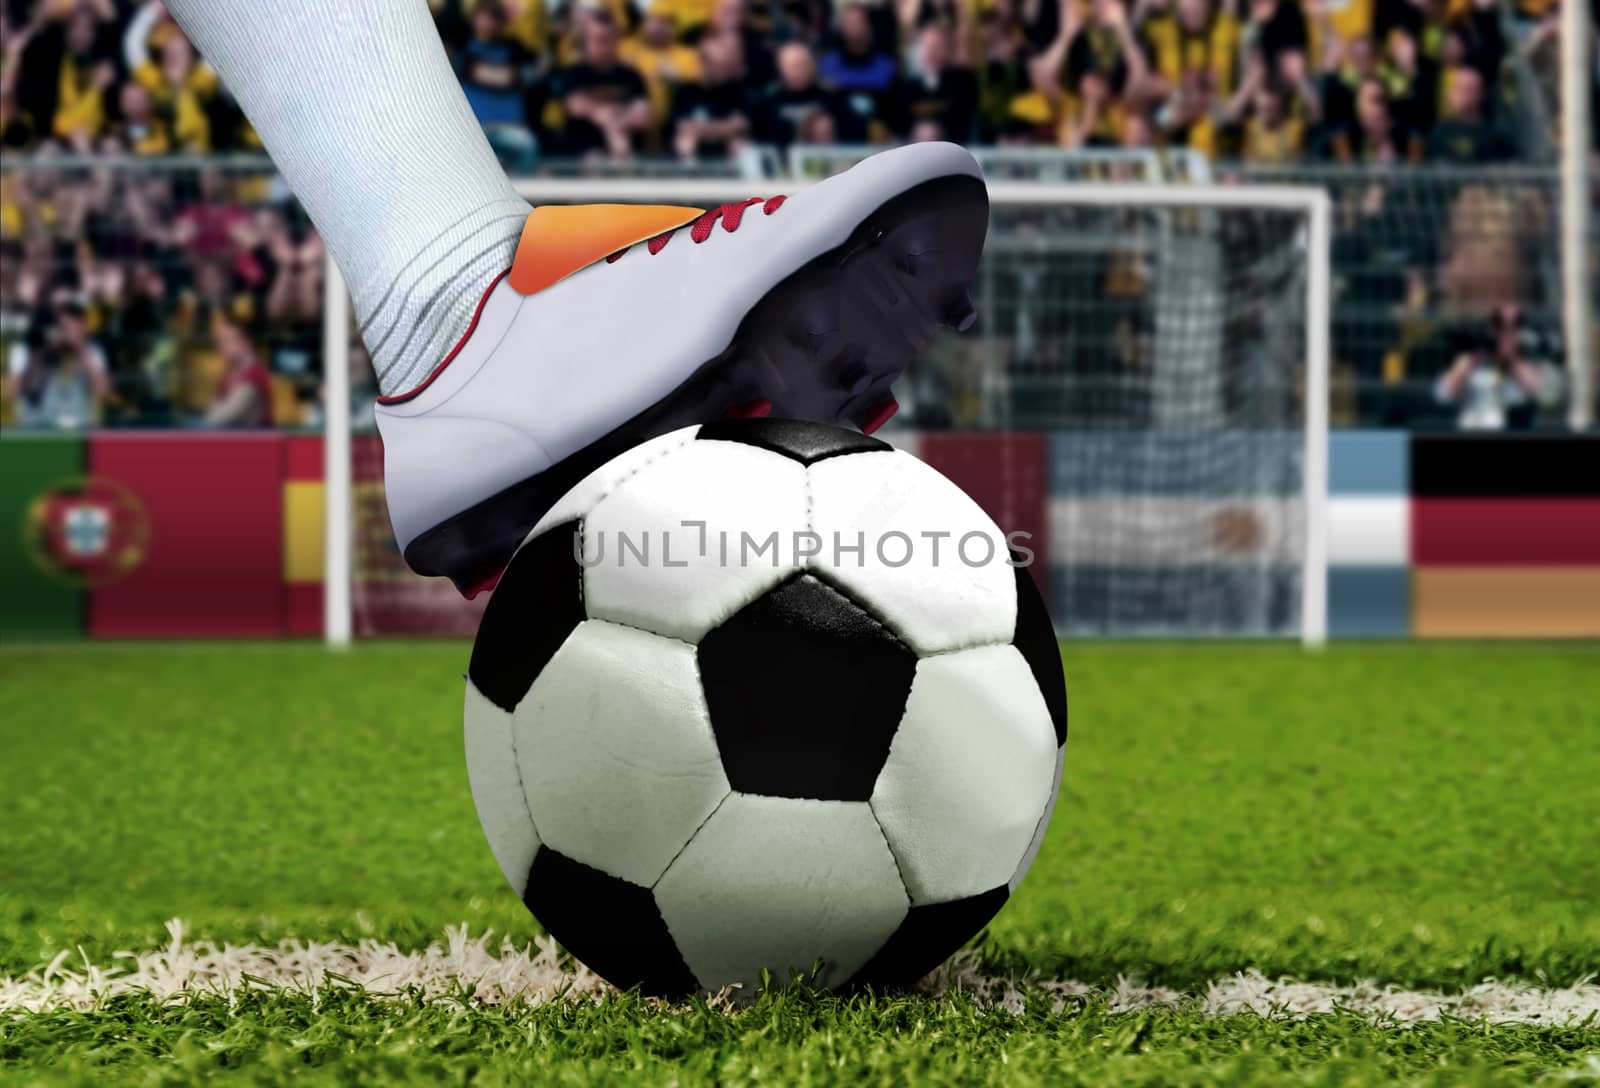 Soccer penalty kick with spectator background by razihusin